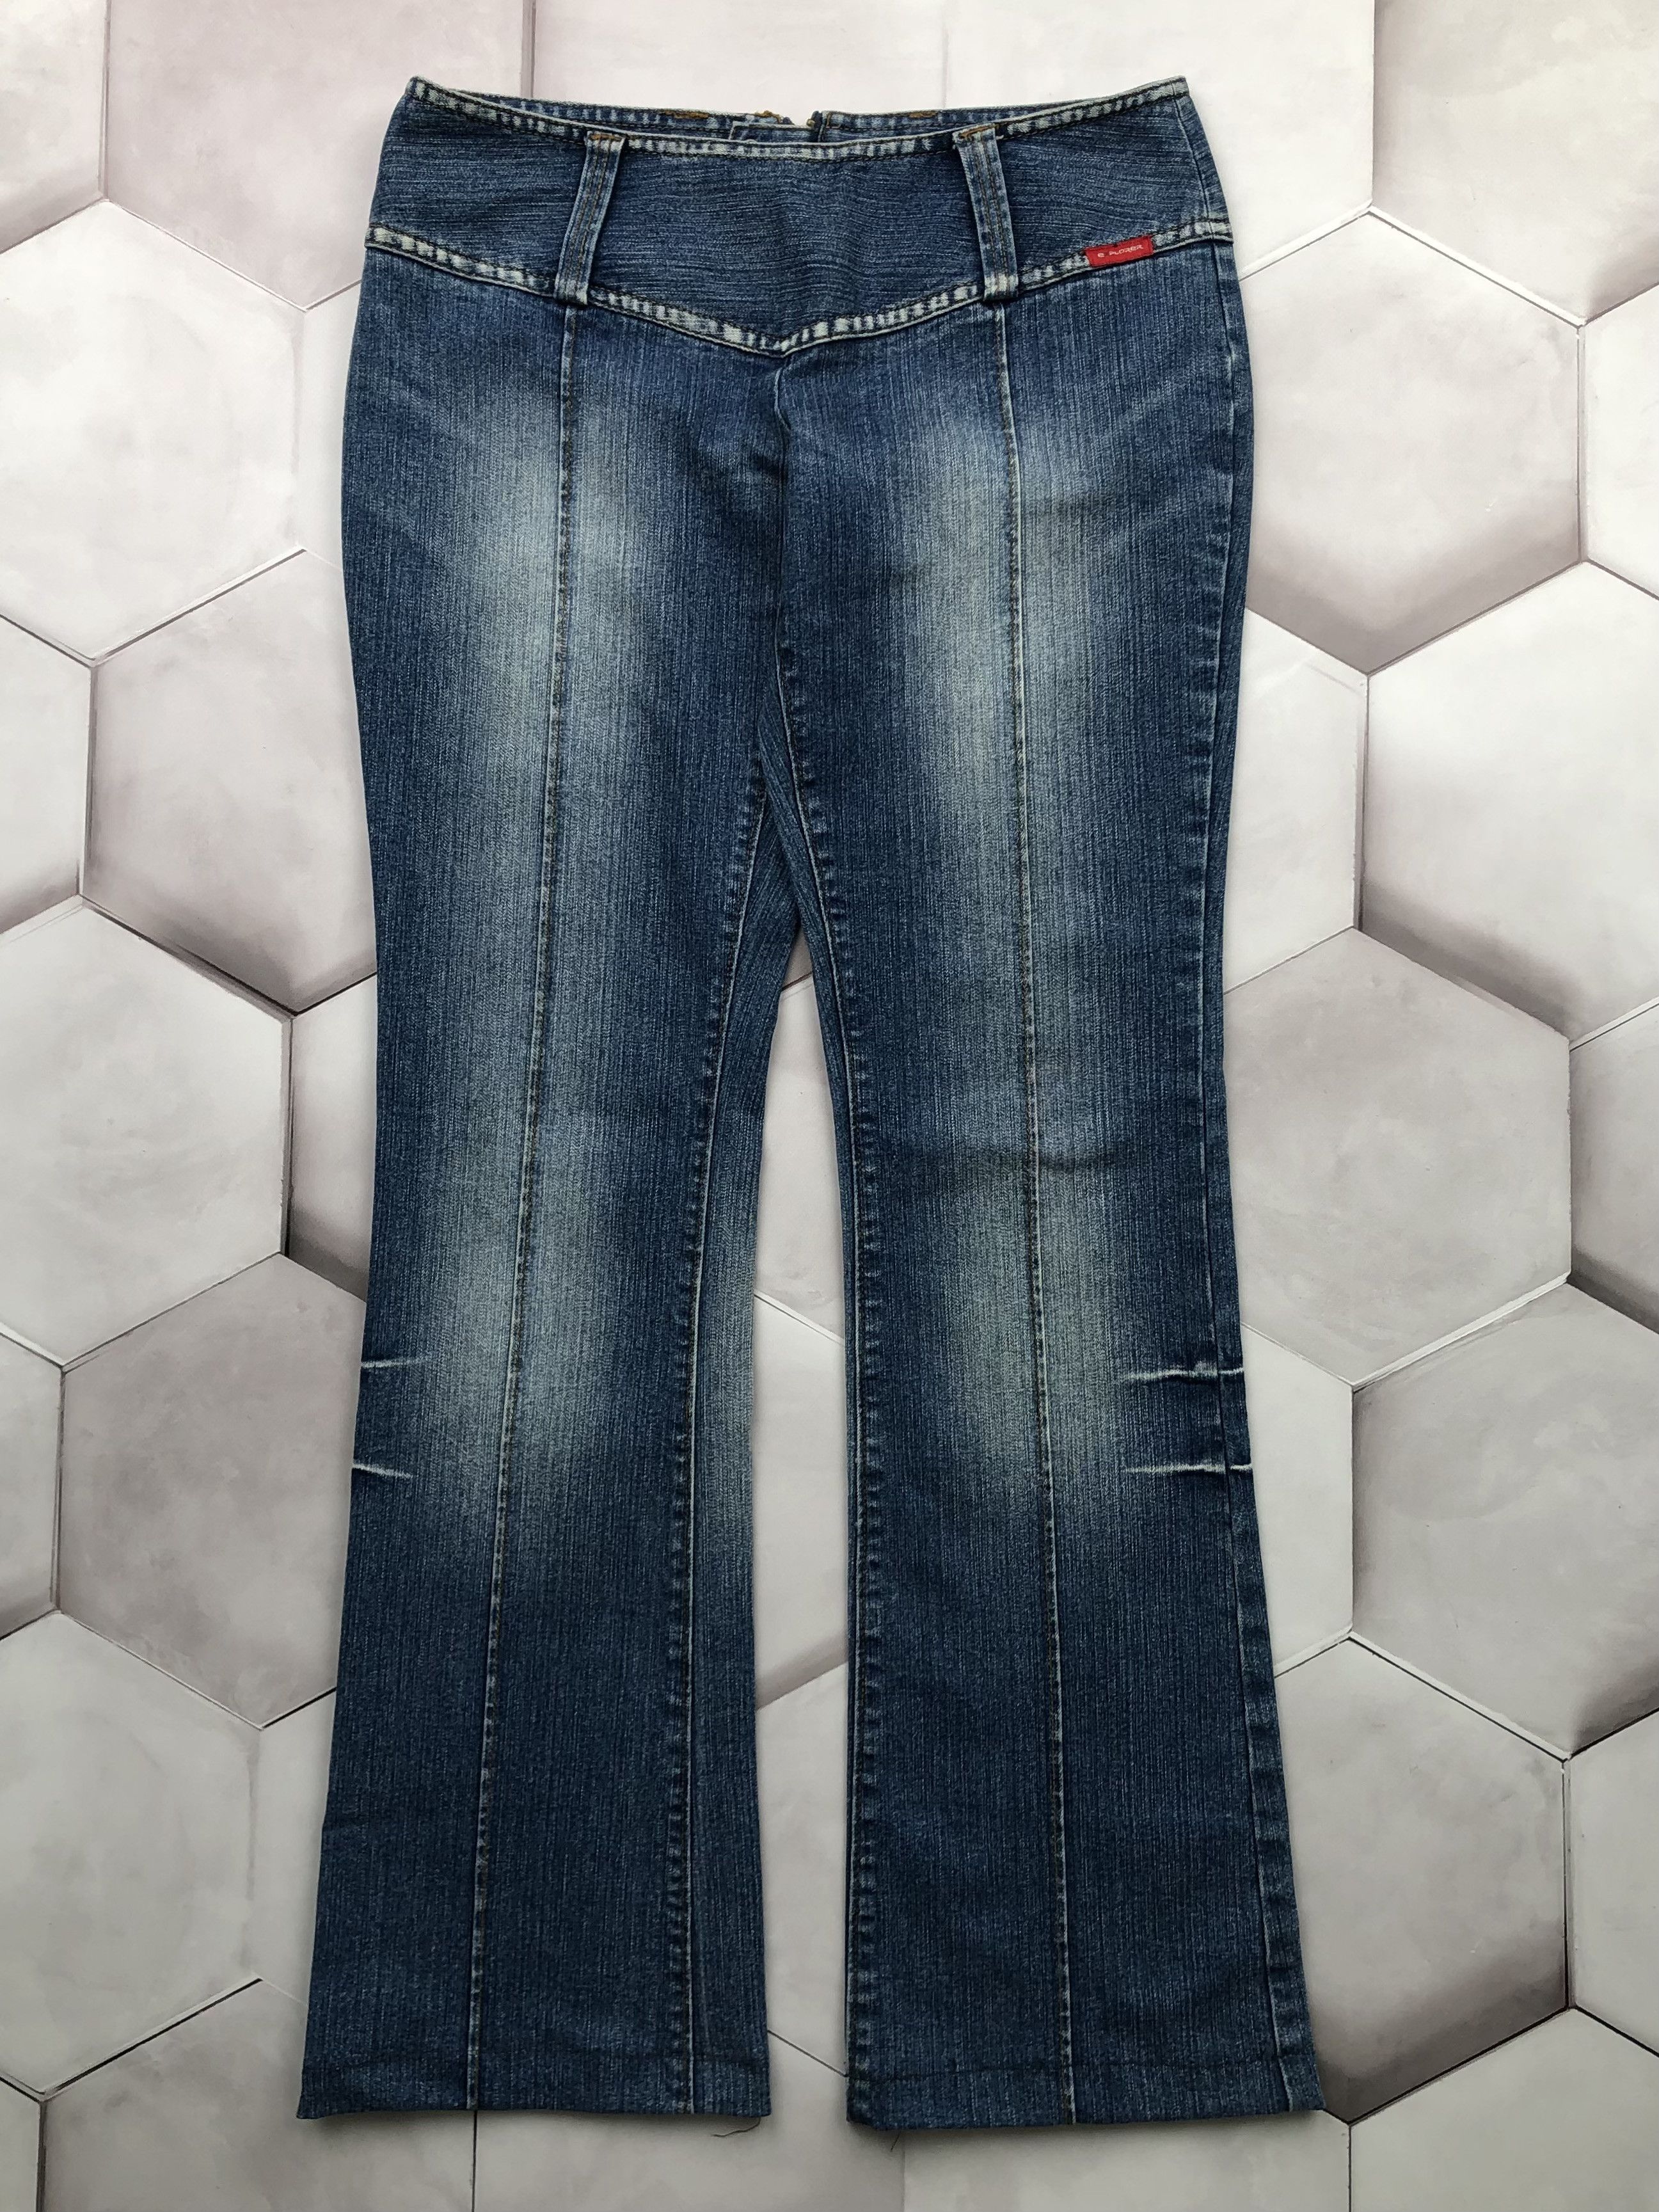 Hysteric Glamour Vintage Faded Flare Jeans | Grailed